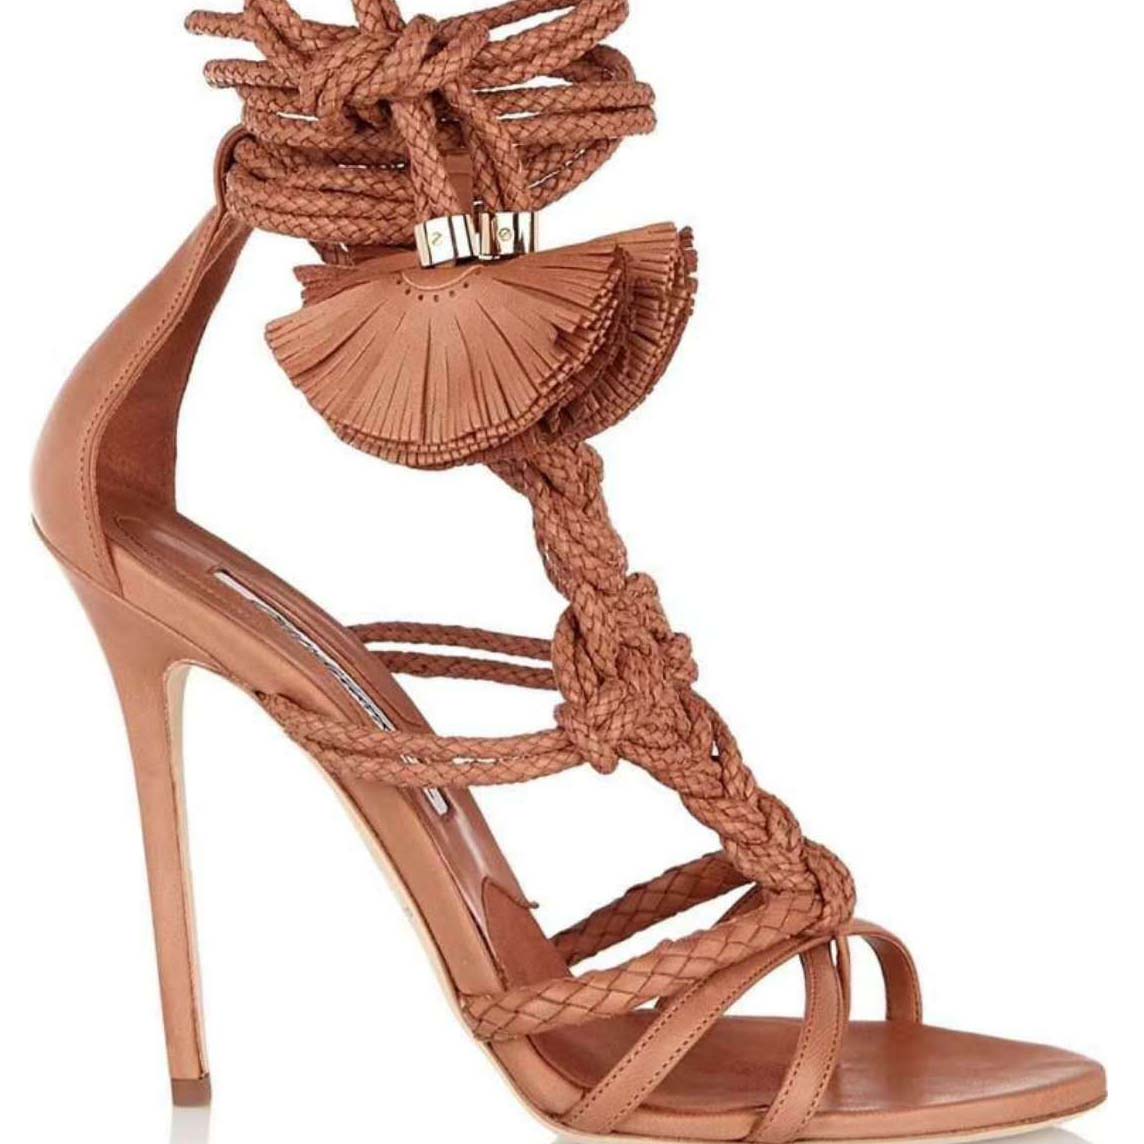 Embellished Strappy Ankle Cutout Sandals